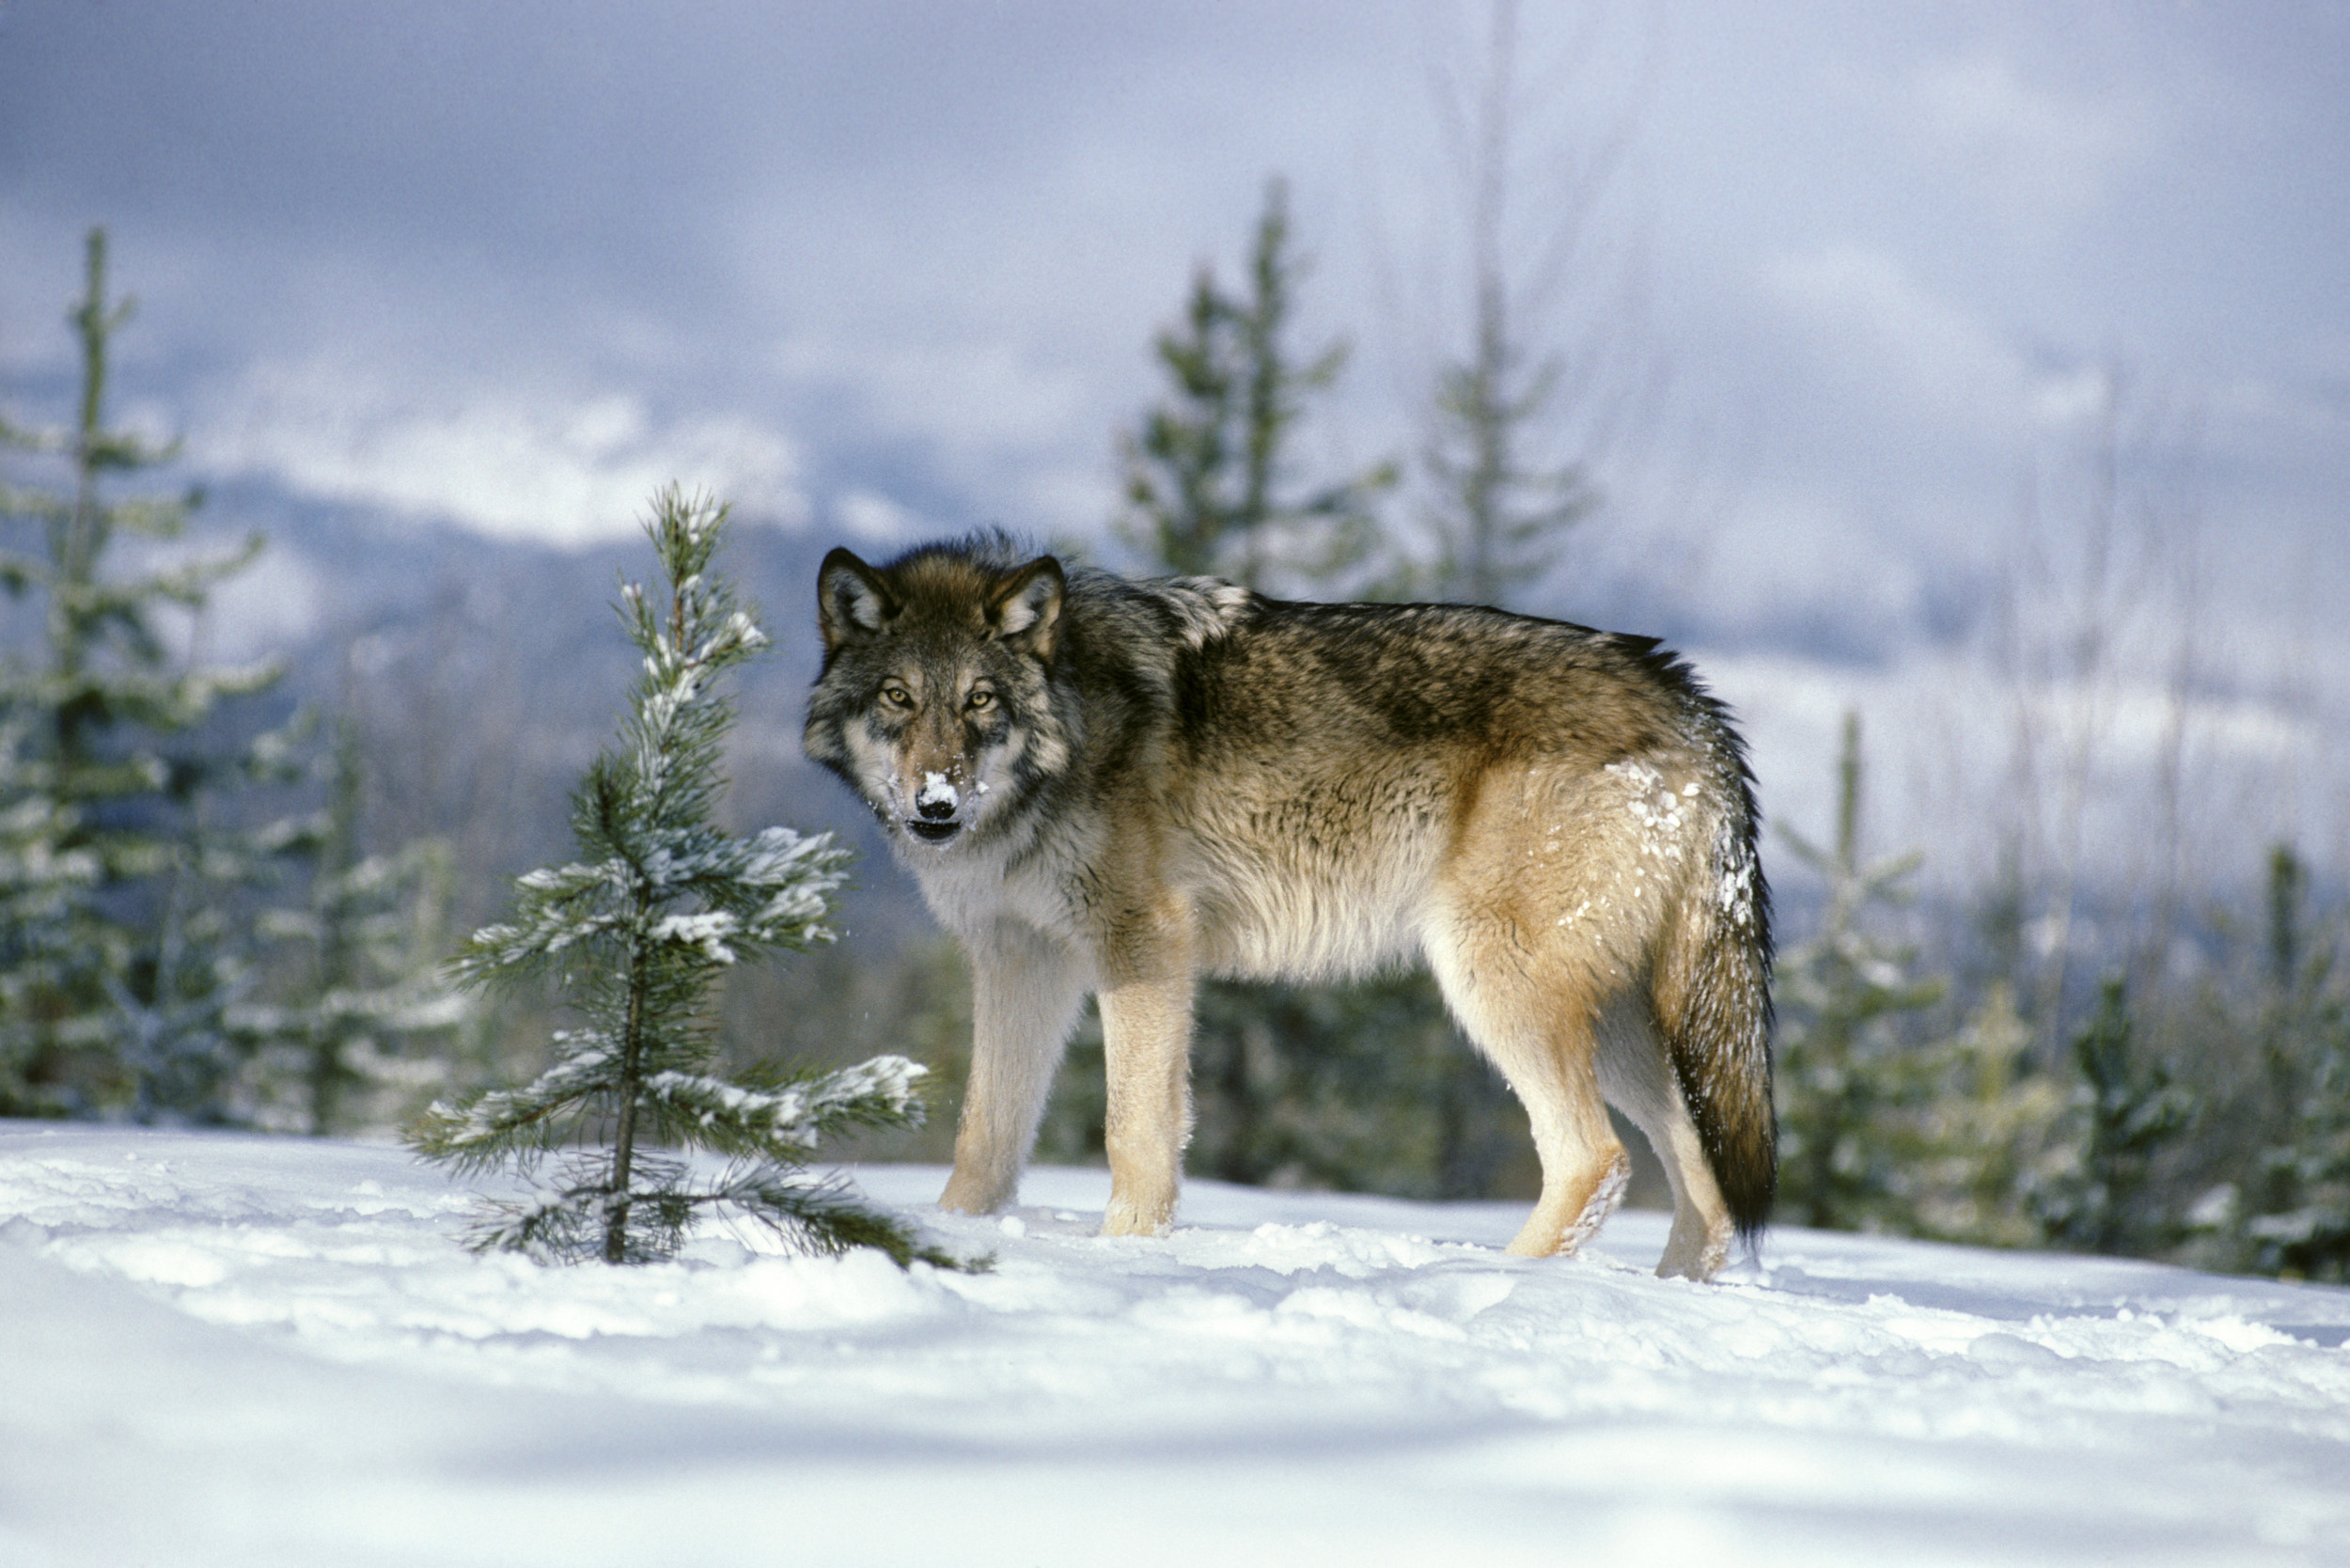 Conservation Group Calls Trump Admin Decision to Revoke Gray Wolves